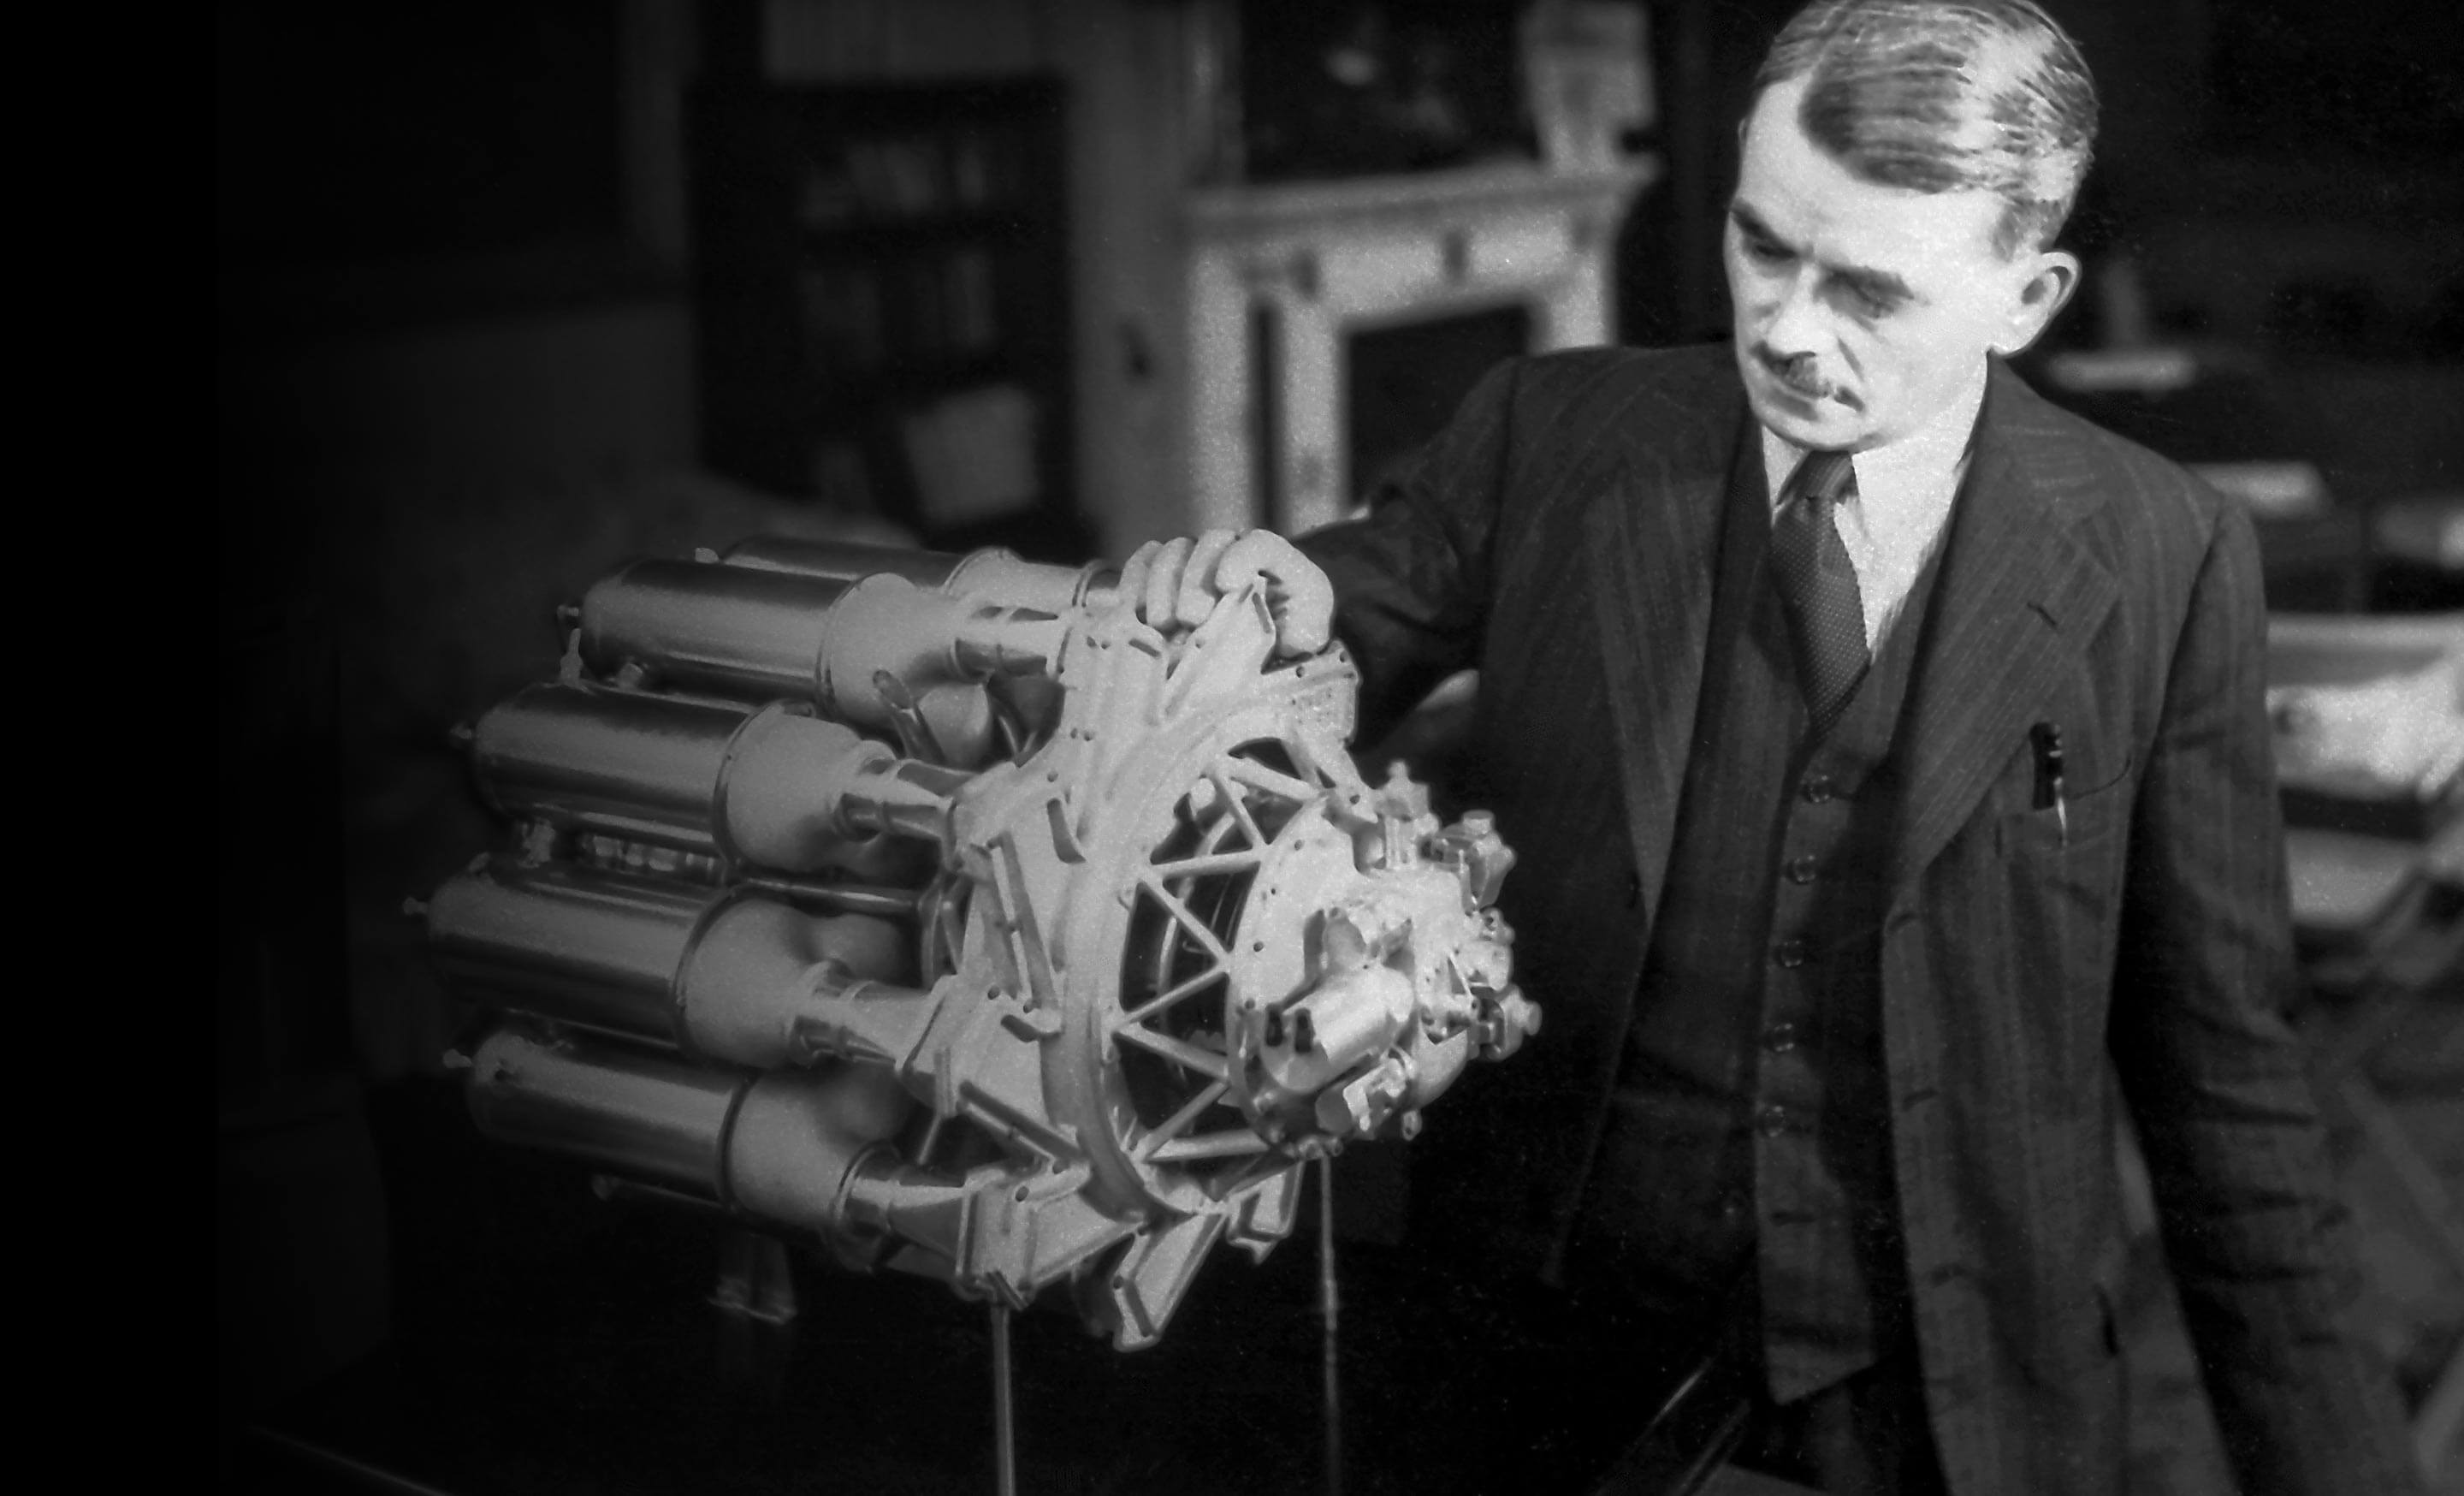 Sir Frank Whittle with a jet engine